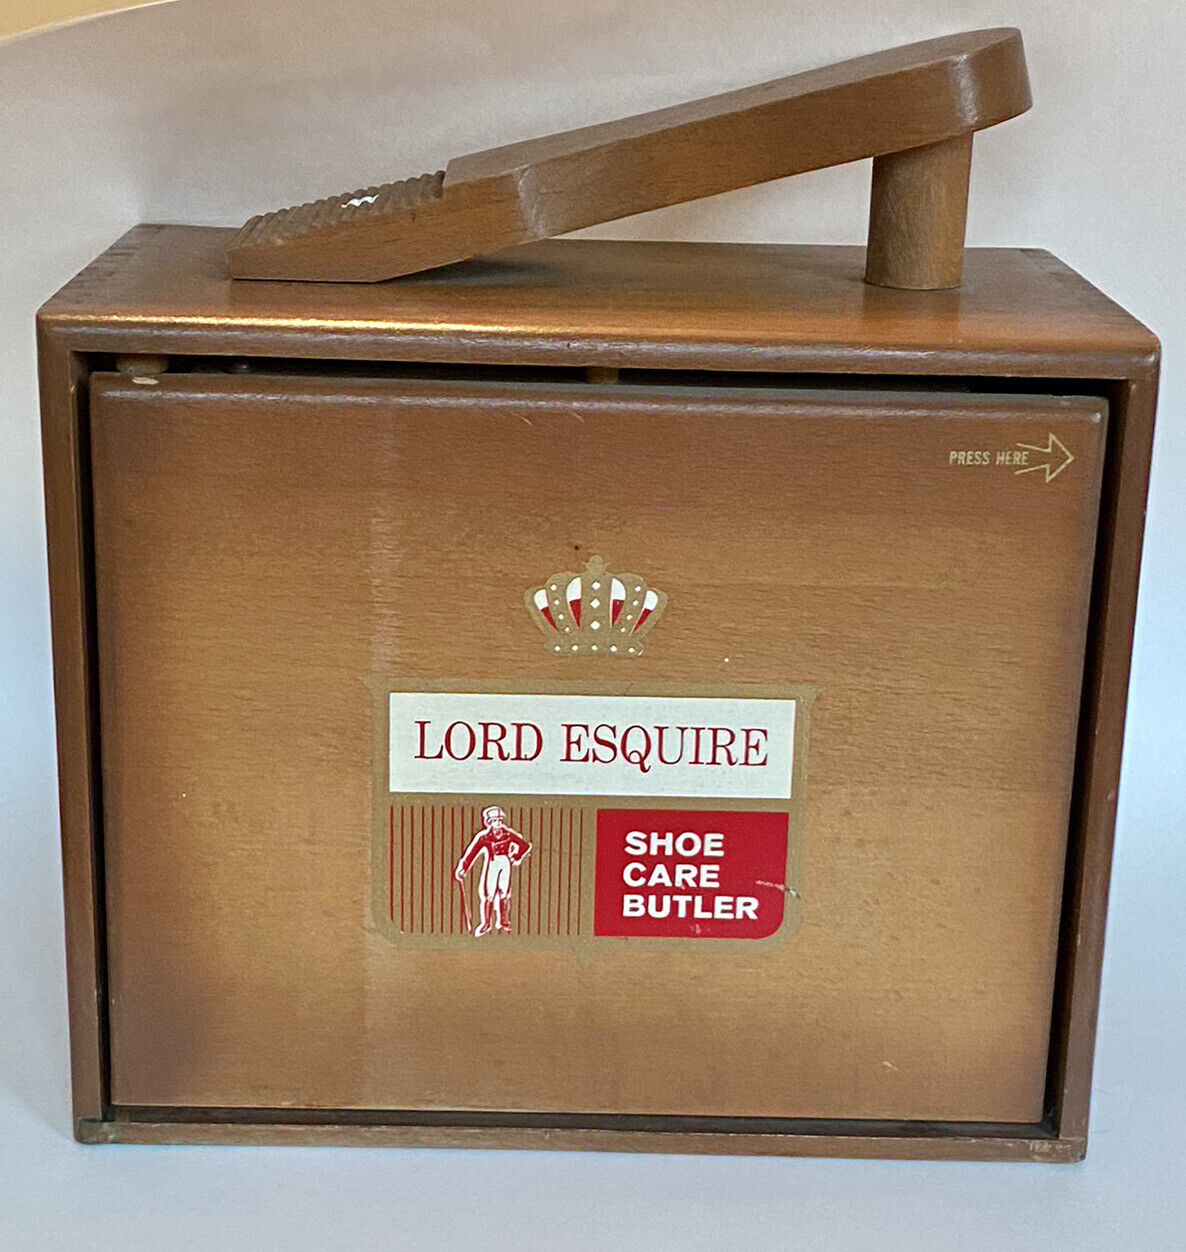 Vintage Lord Esquire Wooden Shoe Valet Kit. With accessories. shoe care butler